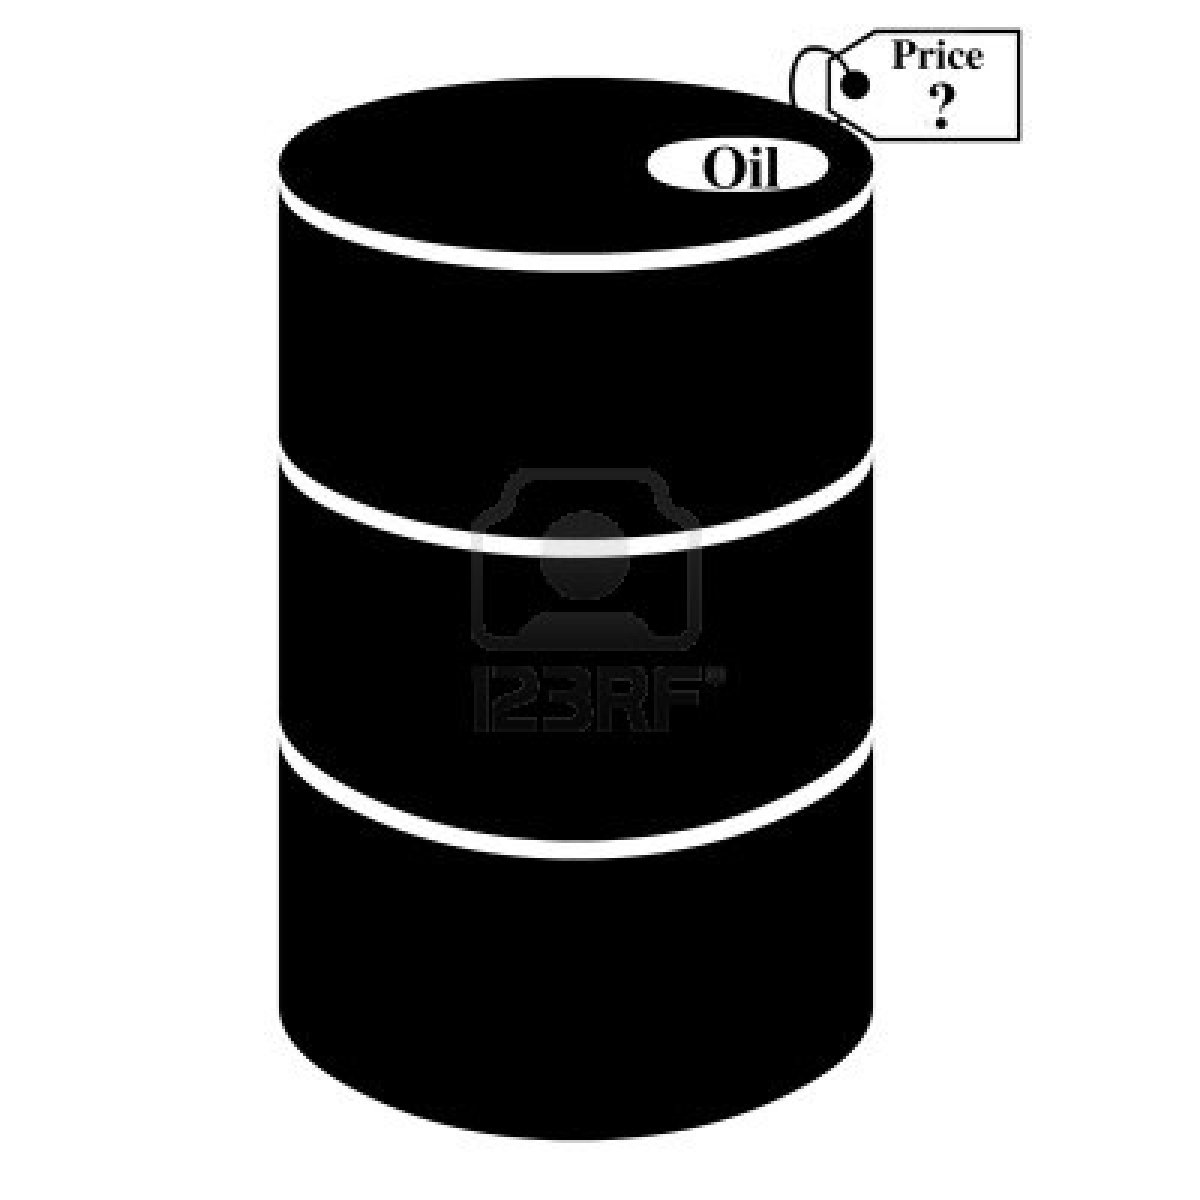 forexdirectory oil